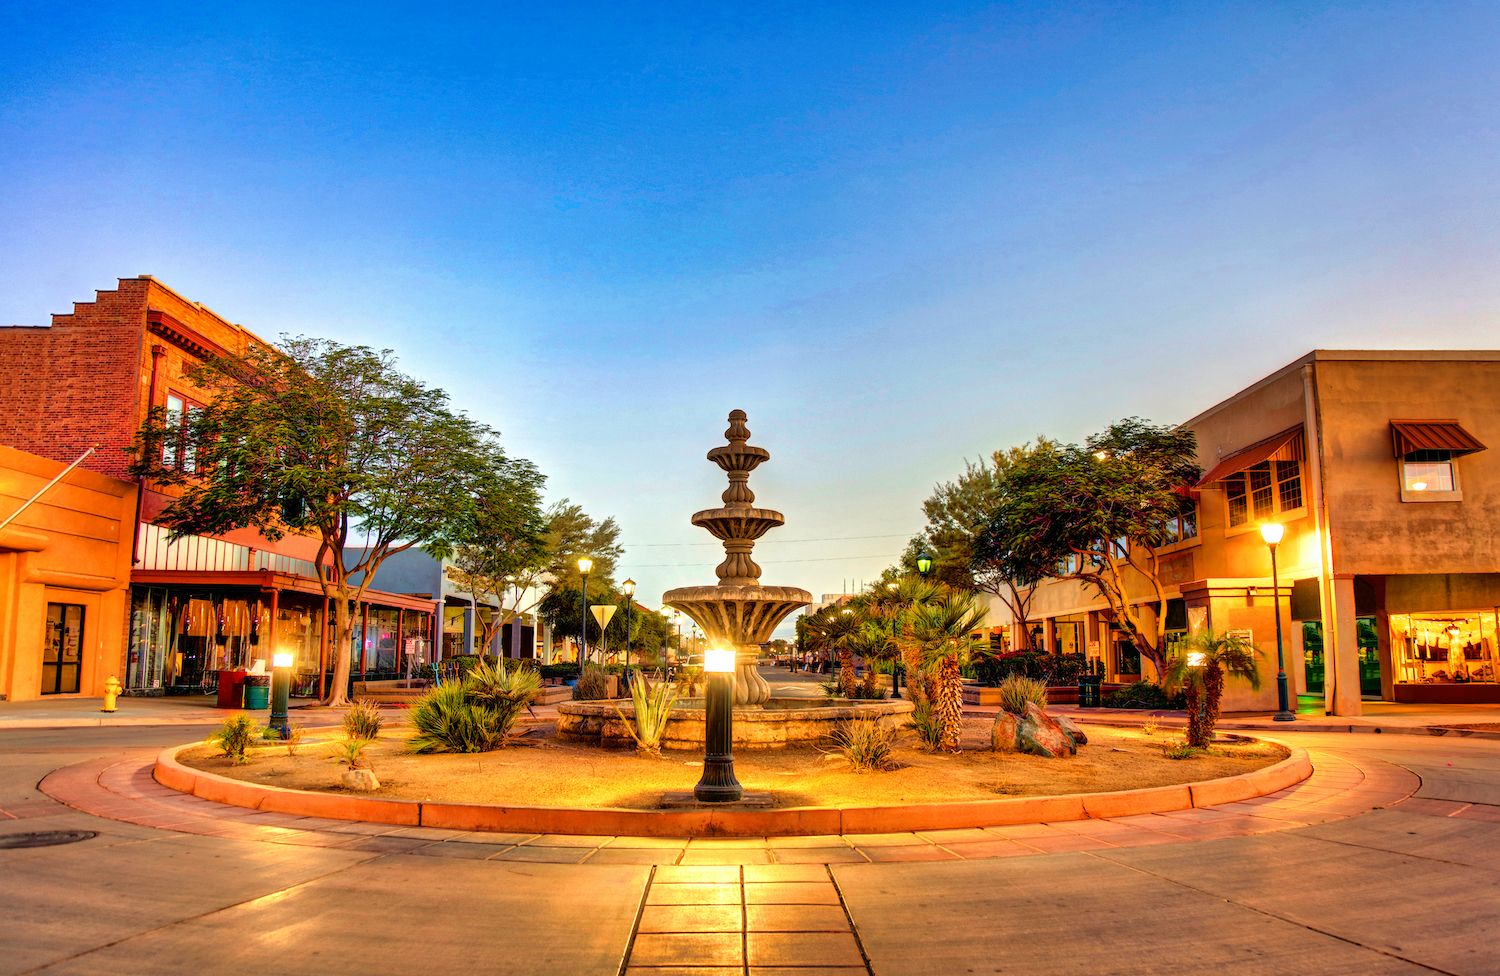 8 Facts About Architectural Landmarks In Glendale, Arizona 